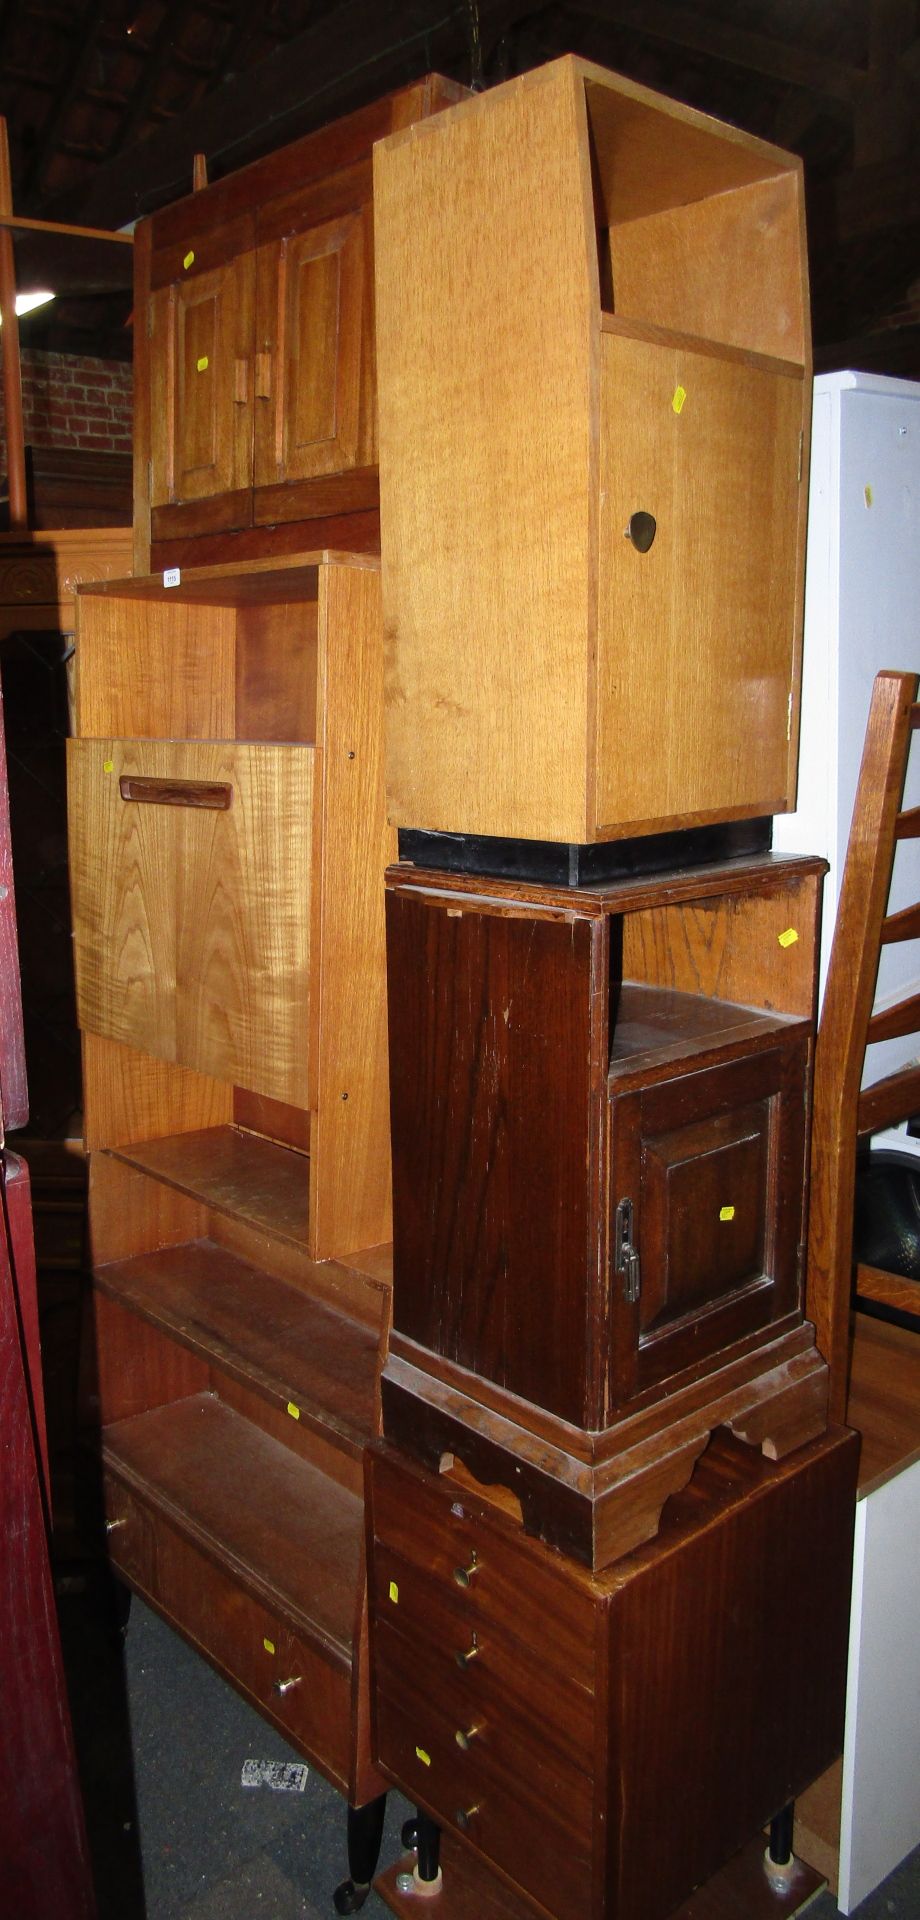 A teak hanging wall cupboard, teak bureaus, nest of pine drawers, and two pot cupboards. (6)